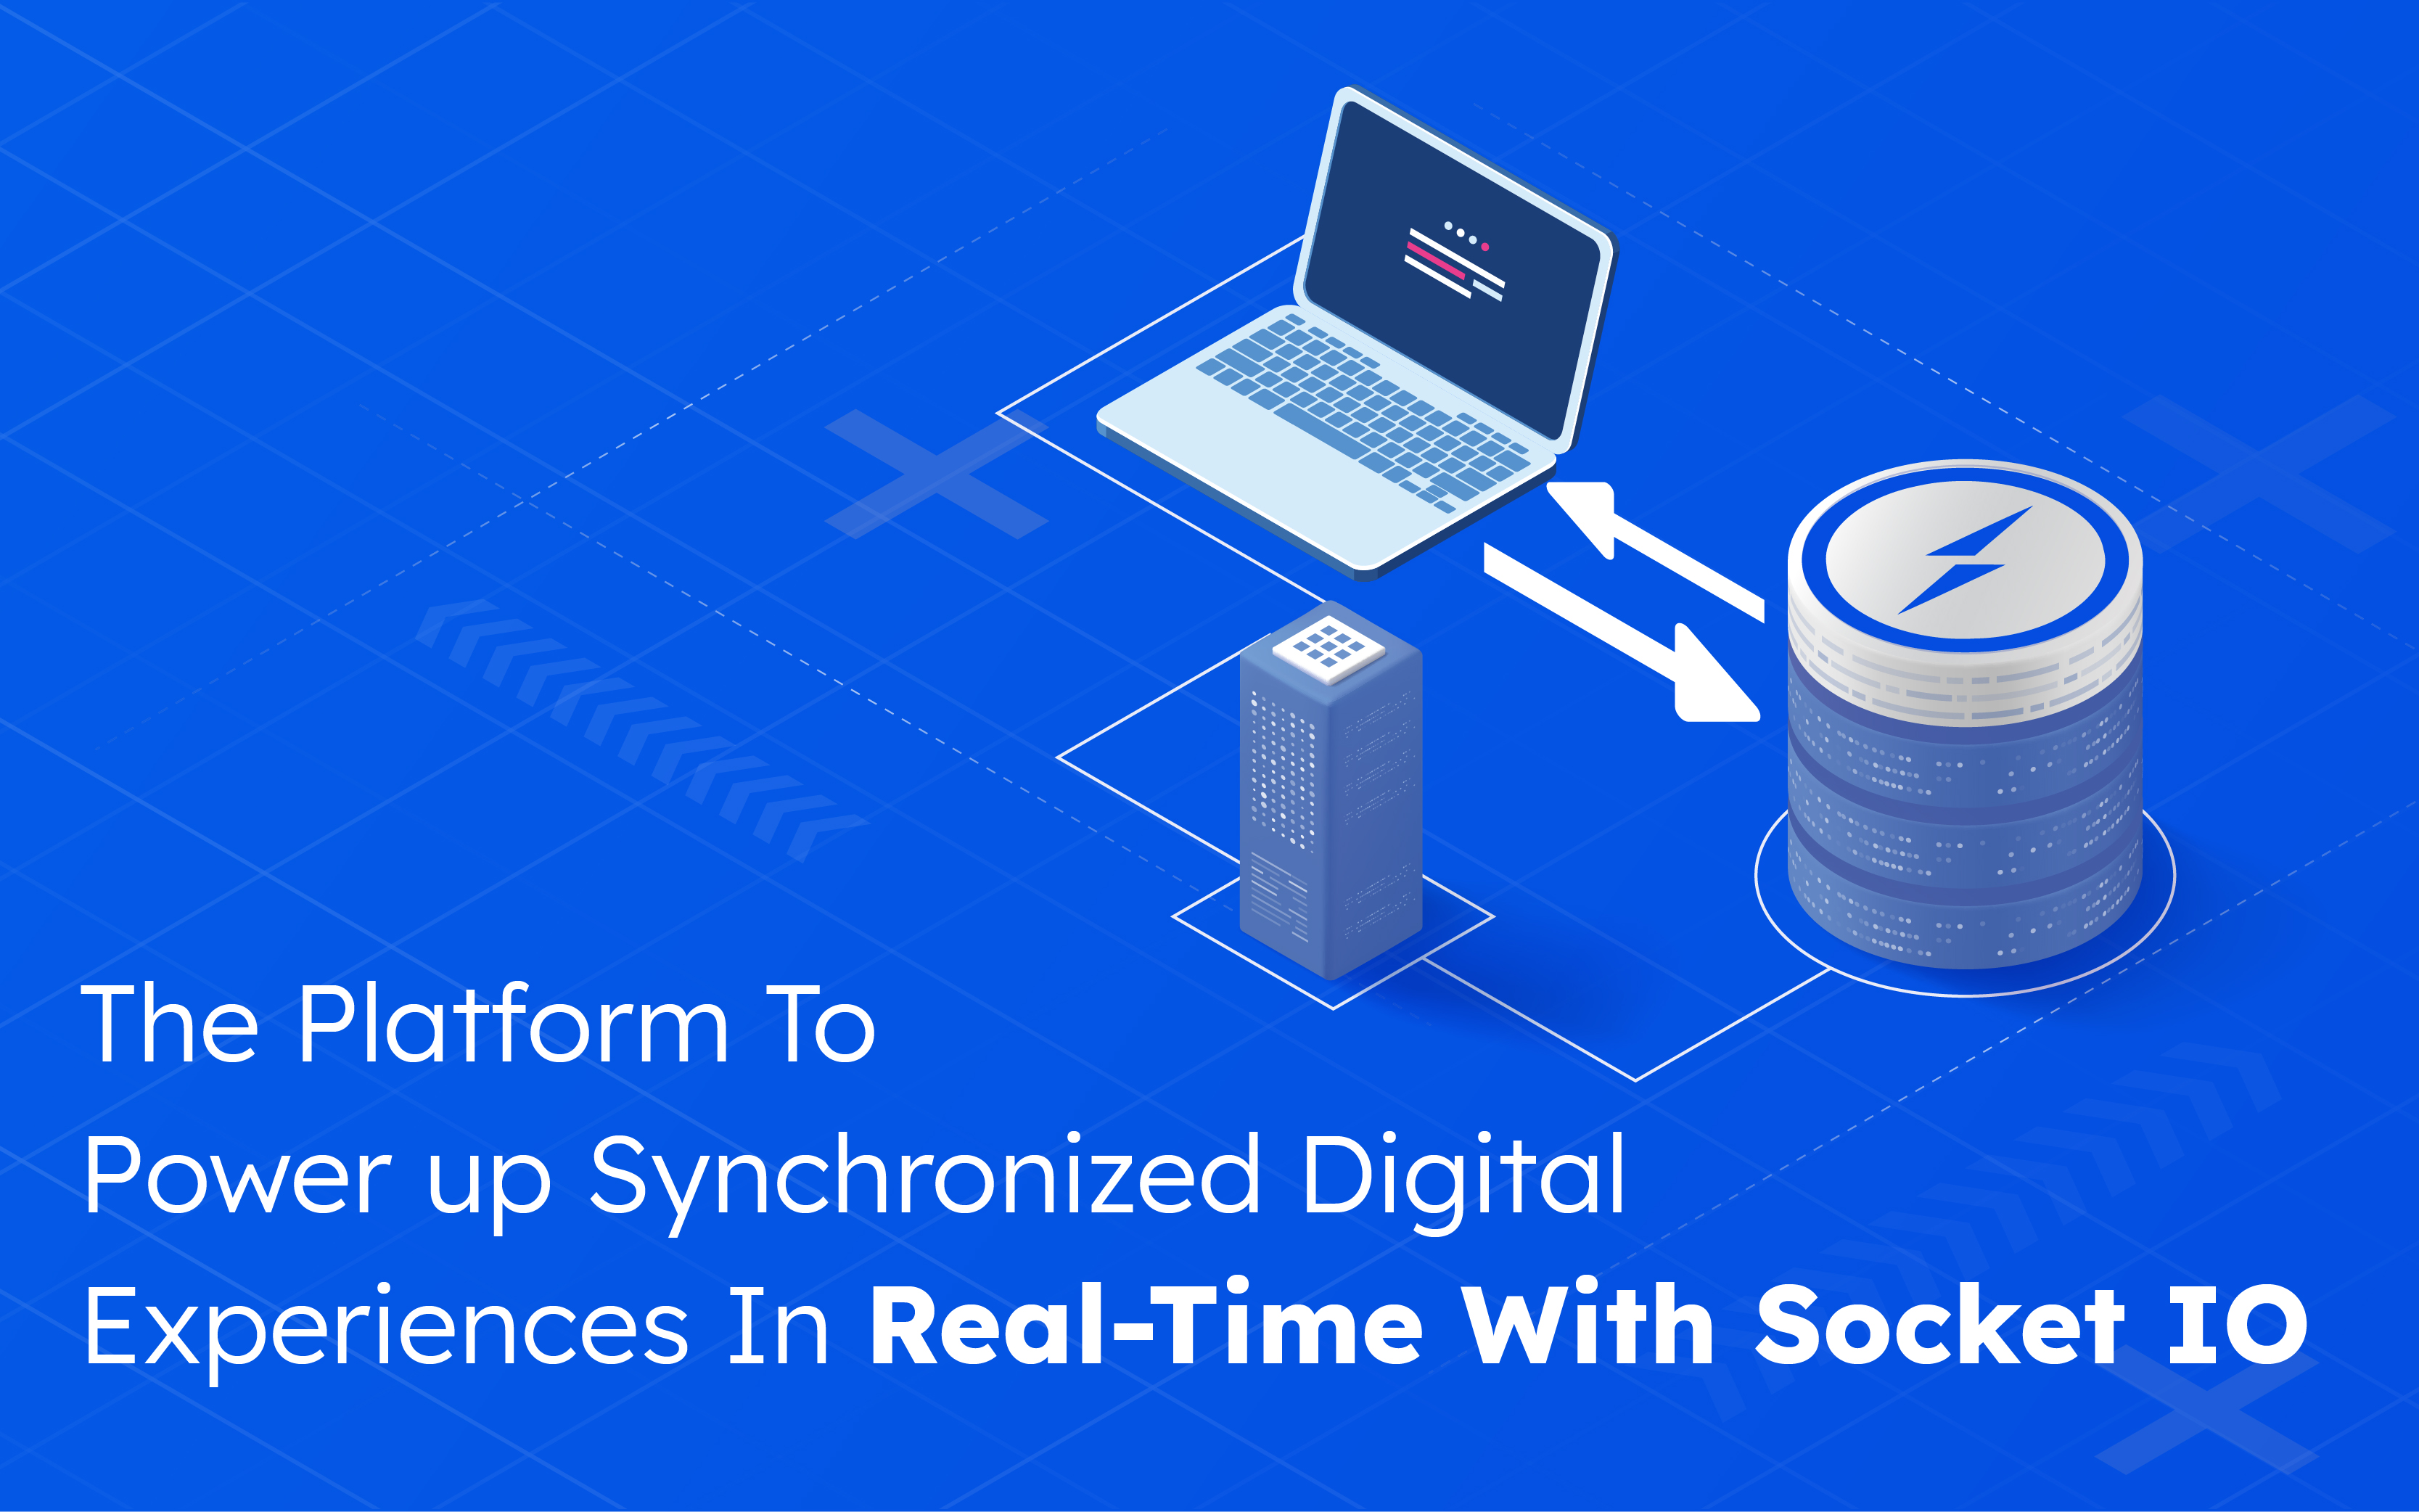 The platform to power synchronized digital experiences in real-time with socket io